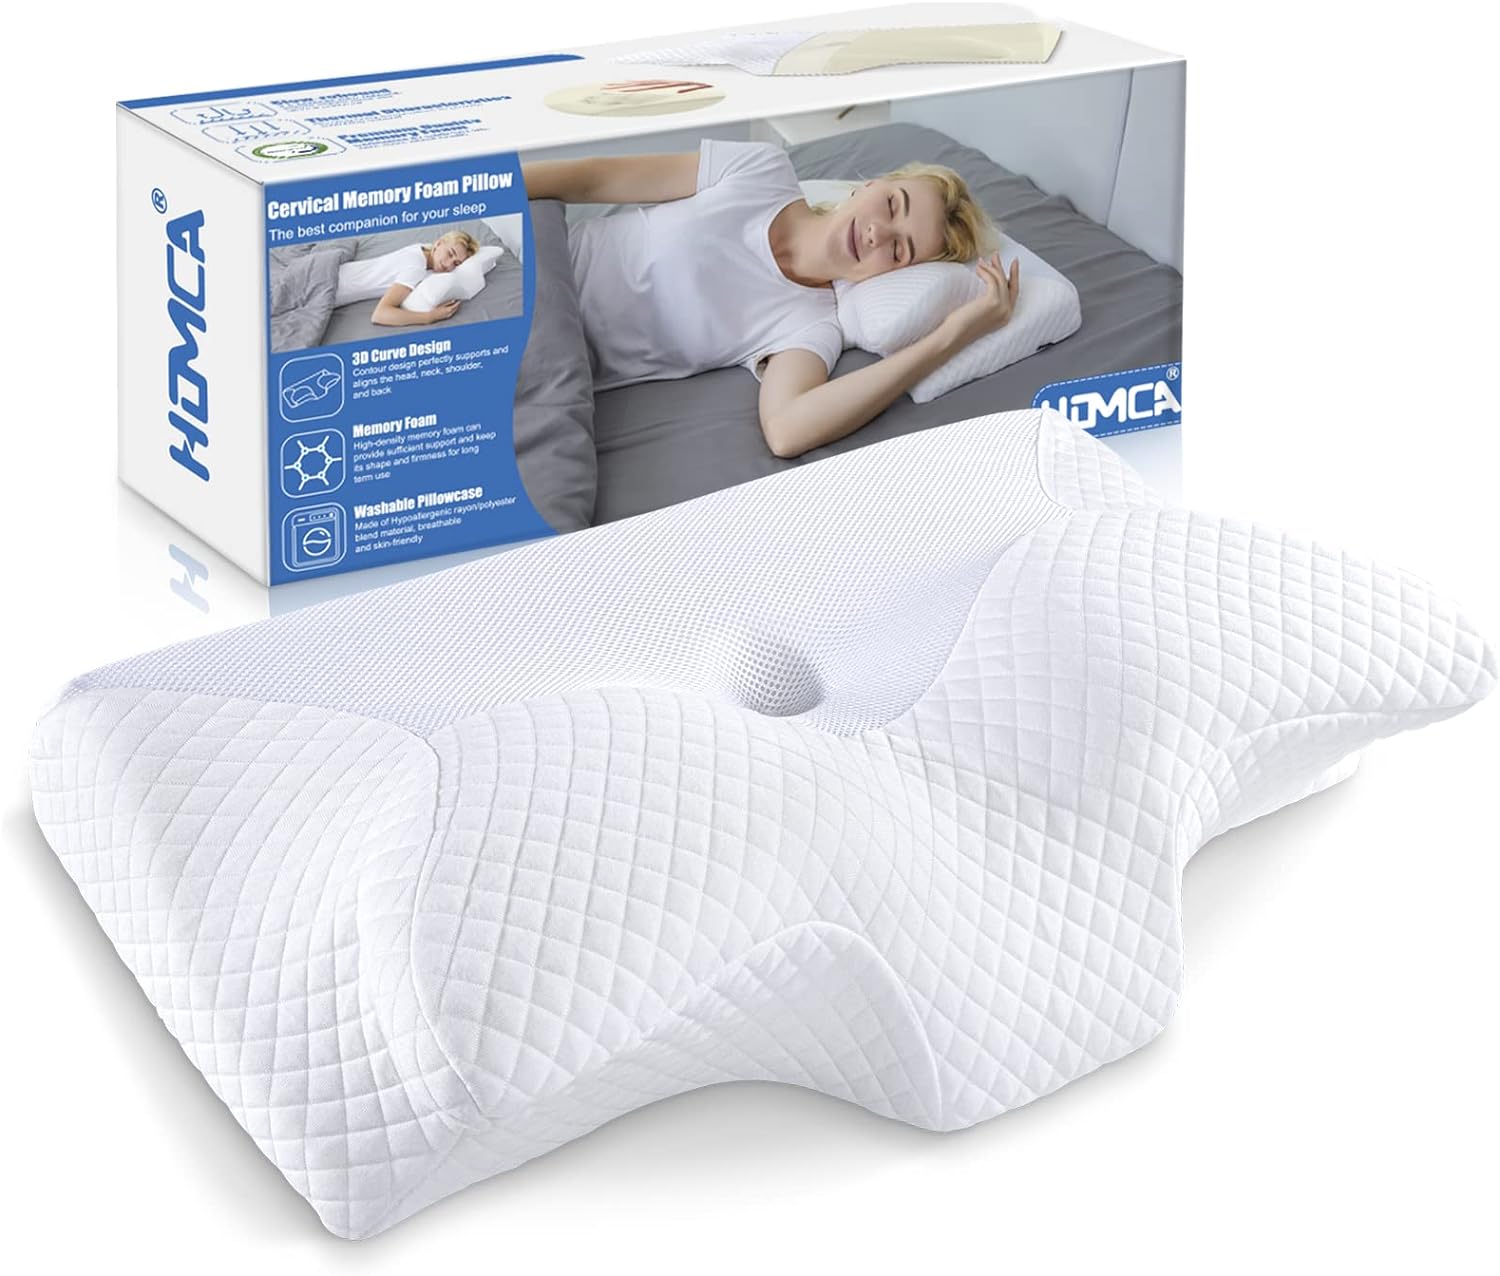 MEMORY FOAM PILLOW ORTHOPAEDIC FIRM HEAD NECK BACK SUPPORT PILLOWS Angel 